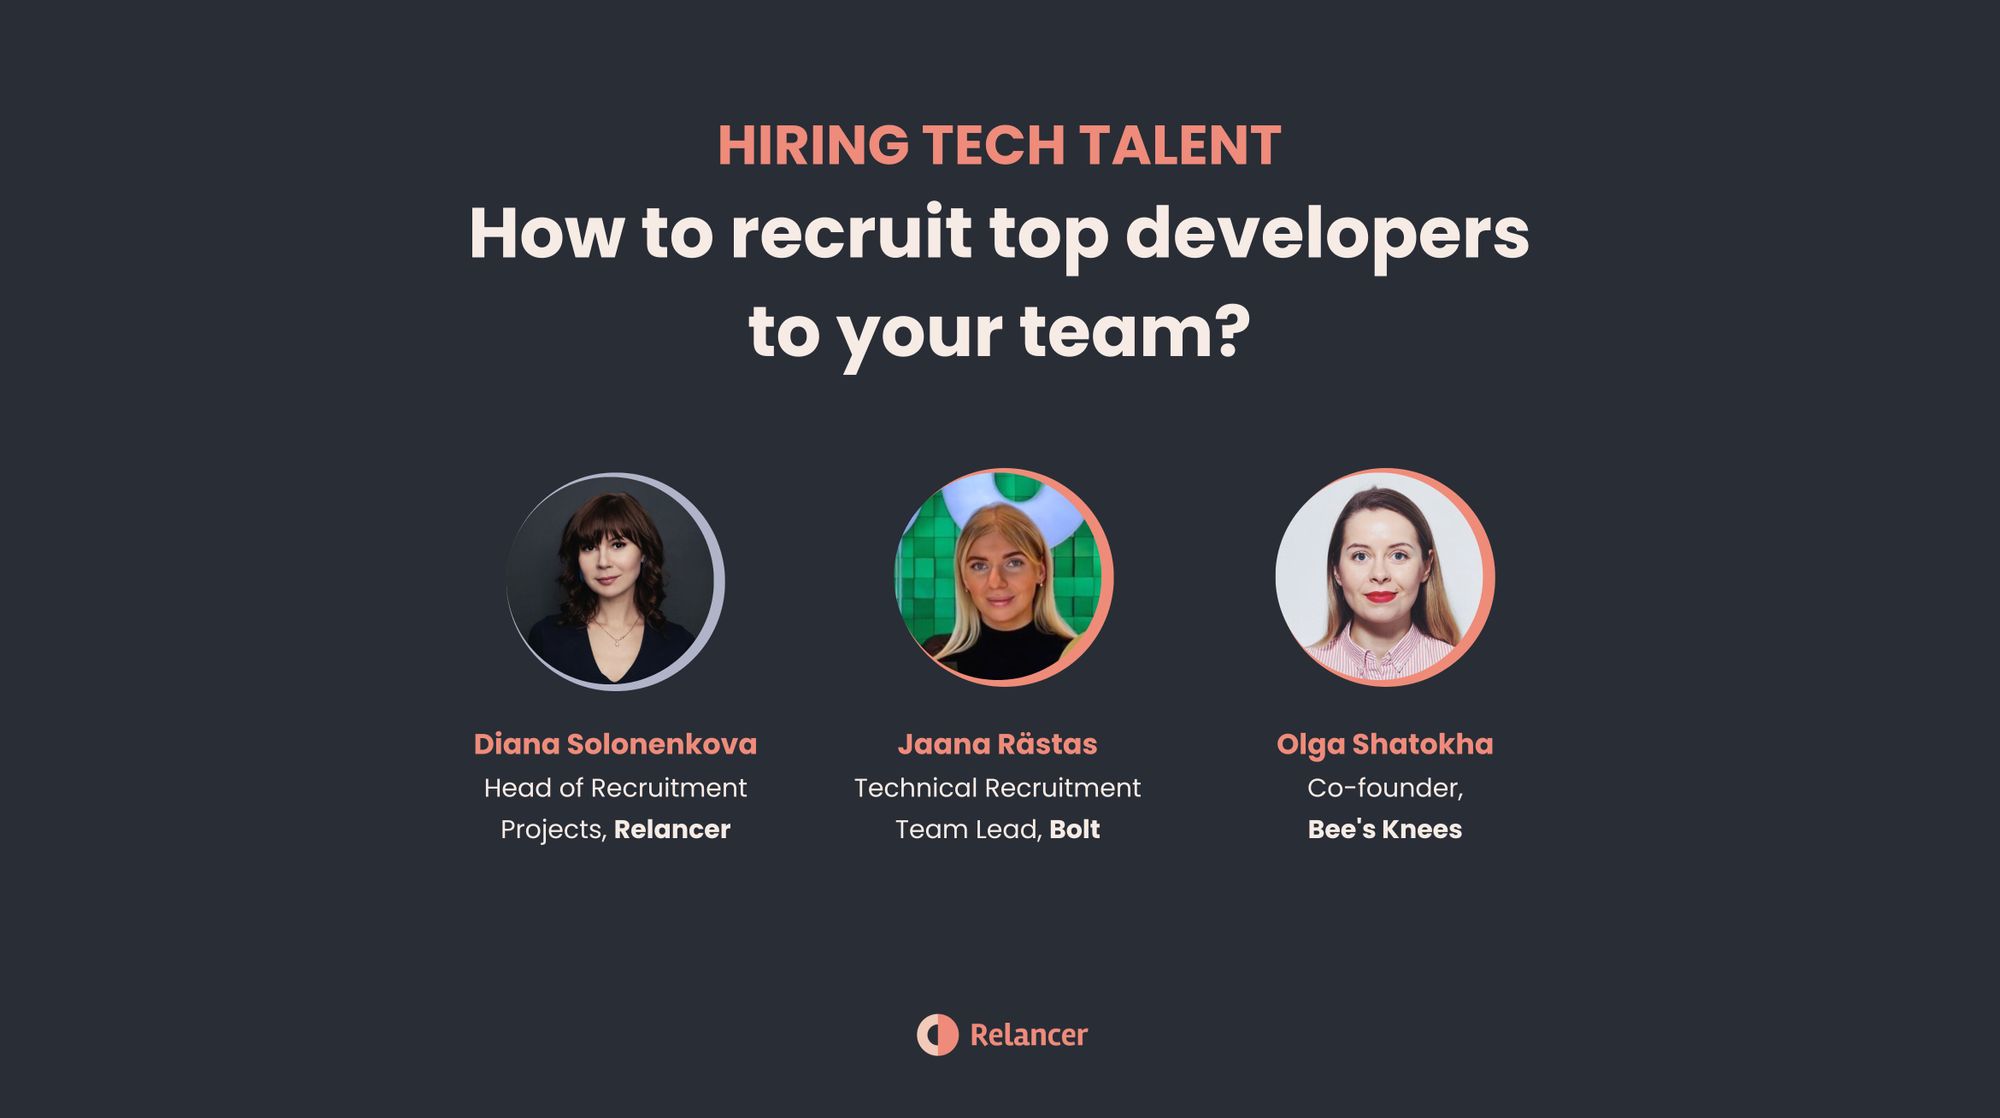 Hiring tech talent: How to recruit top developers to your team?